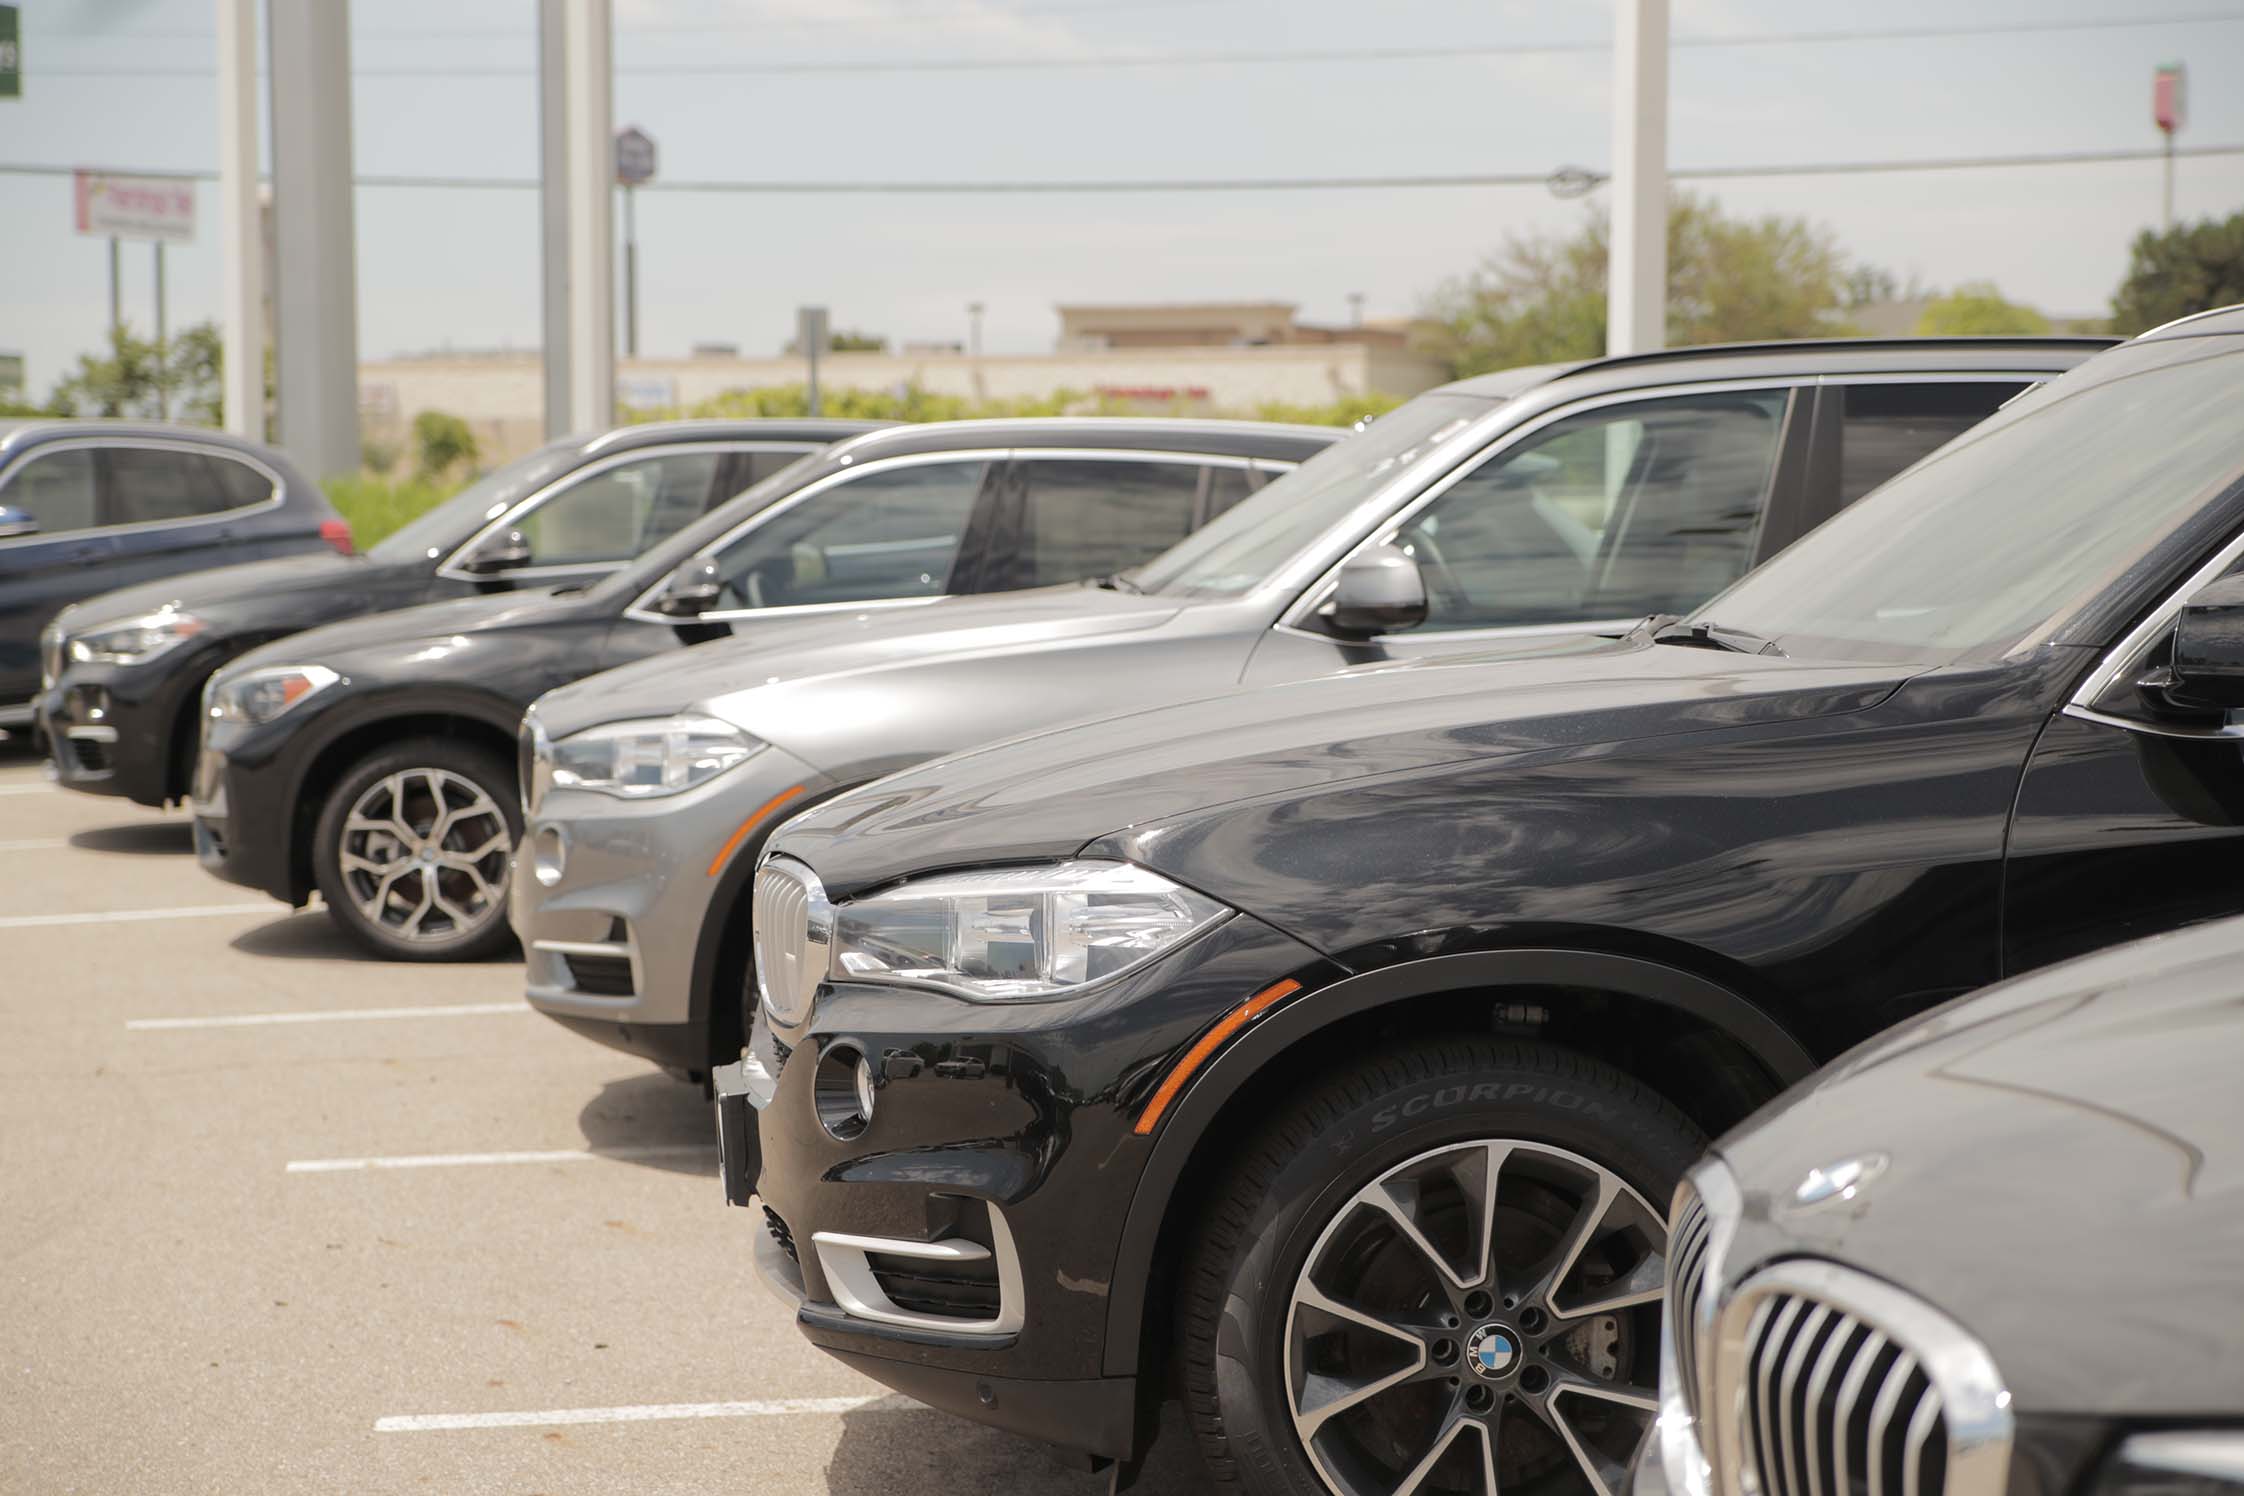 BMW vehicles at our dealership in Dayton, OH